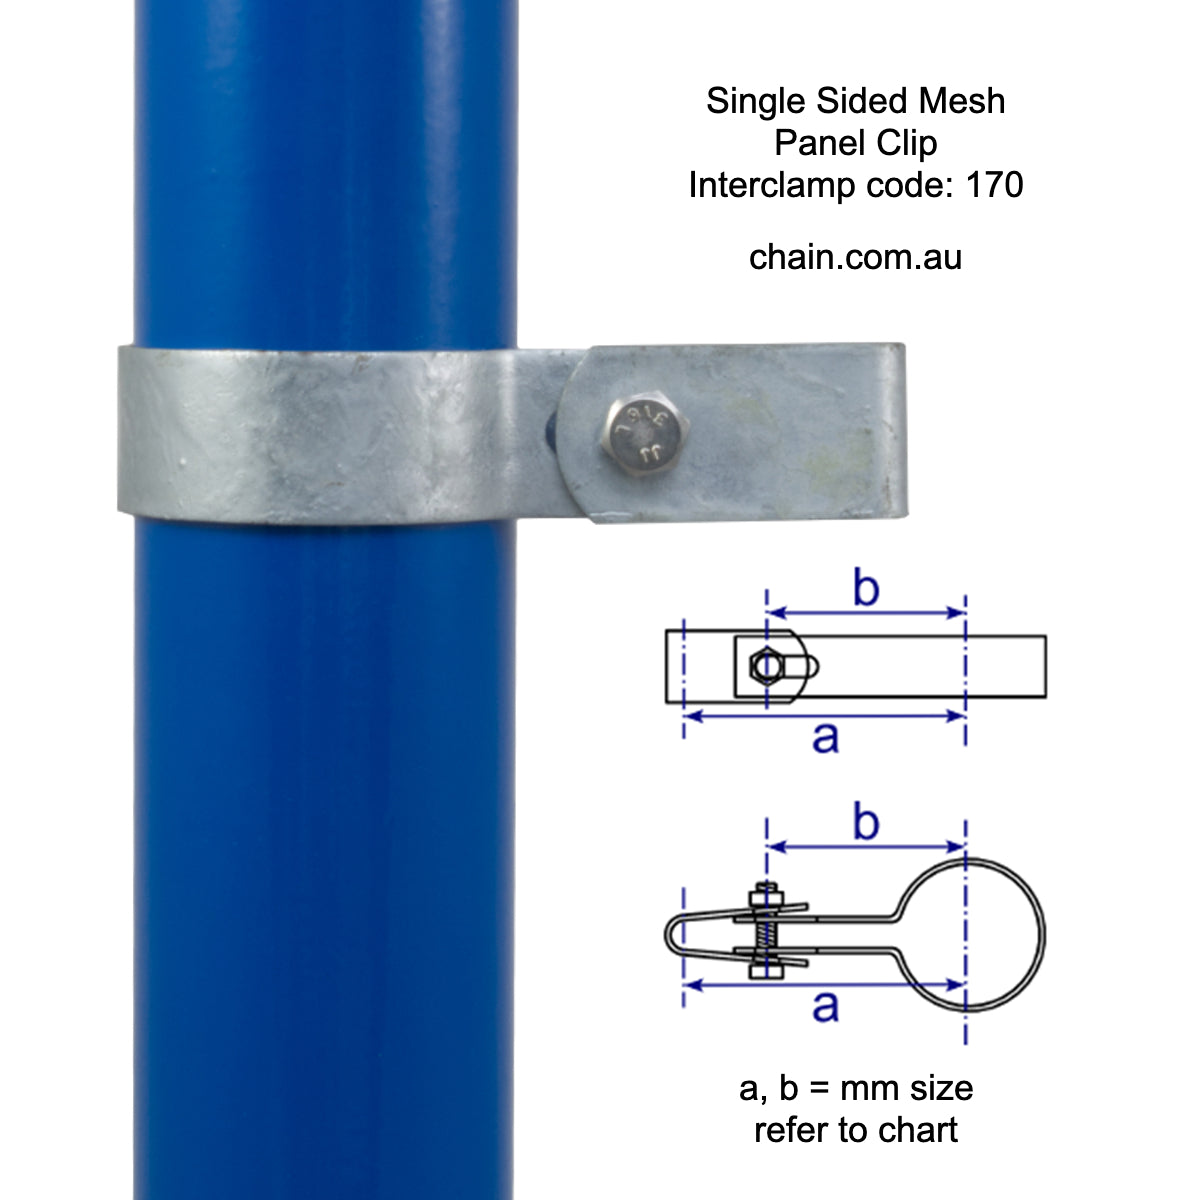 Single Sided Mesh Panel Clip, Interclamp Code 170. Shop rail, pipe and fence fittings online chain.com.au. Australia wide shipping.